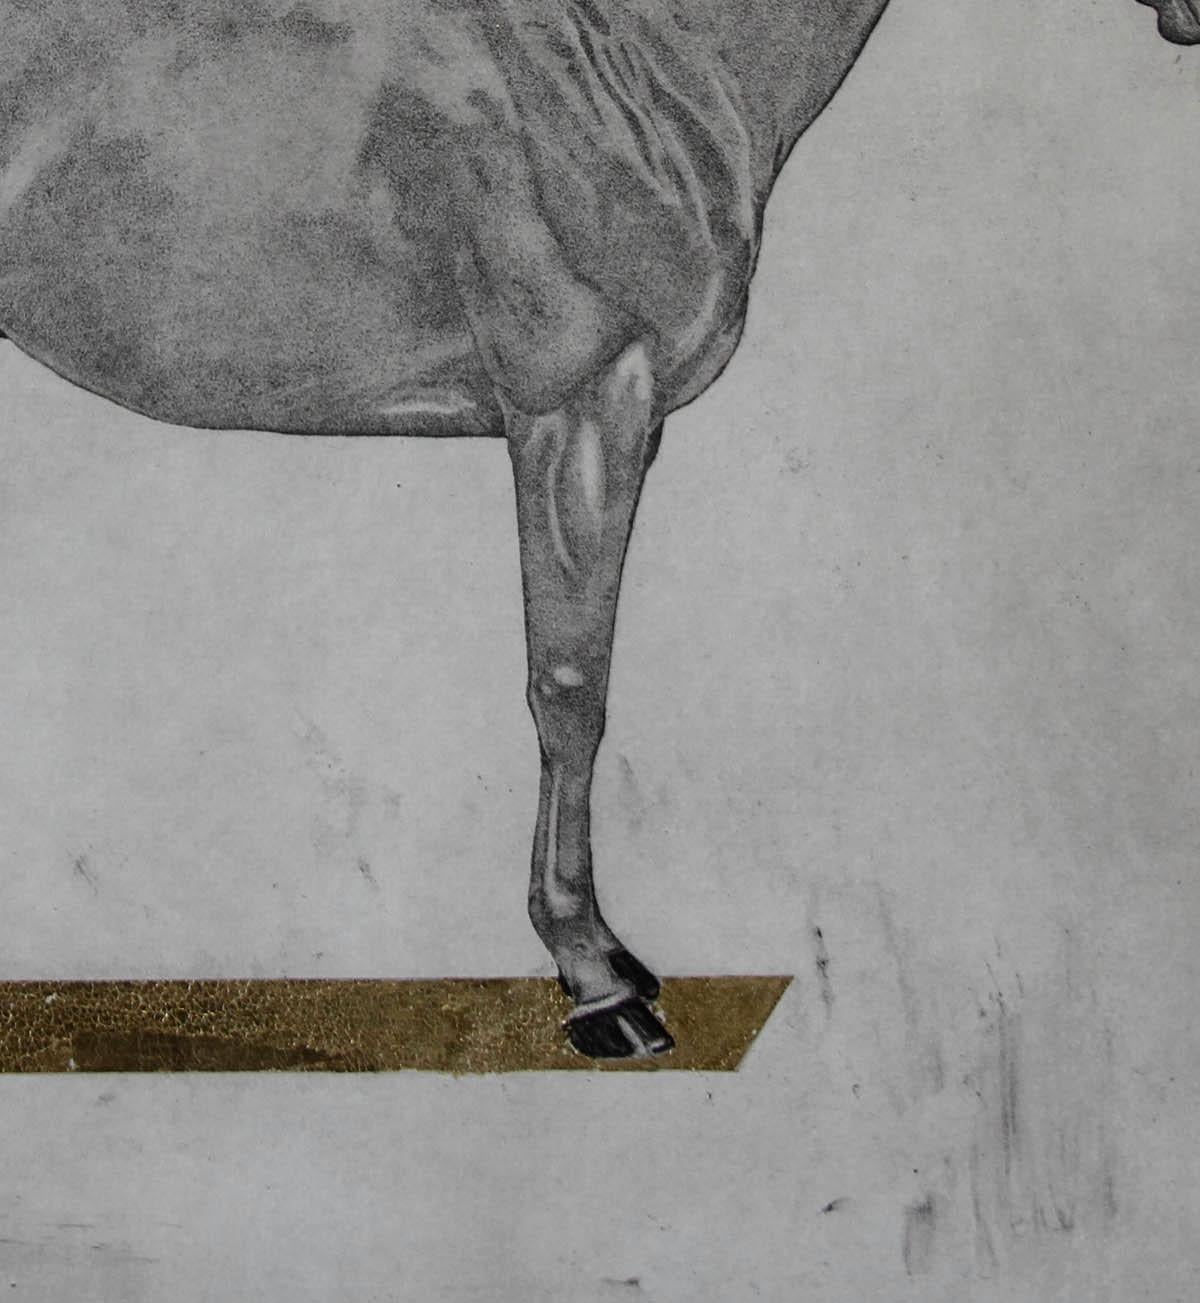 Guy Allen limited edition print.
The Winner
Etching, Aquatint and Gold leaf
600mm x 750mm
This work is sold unframed